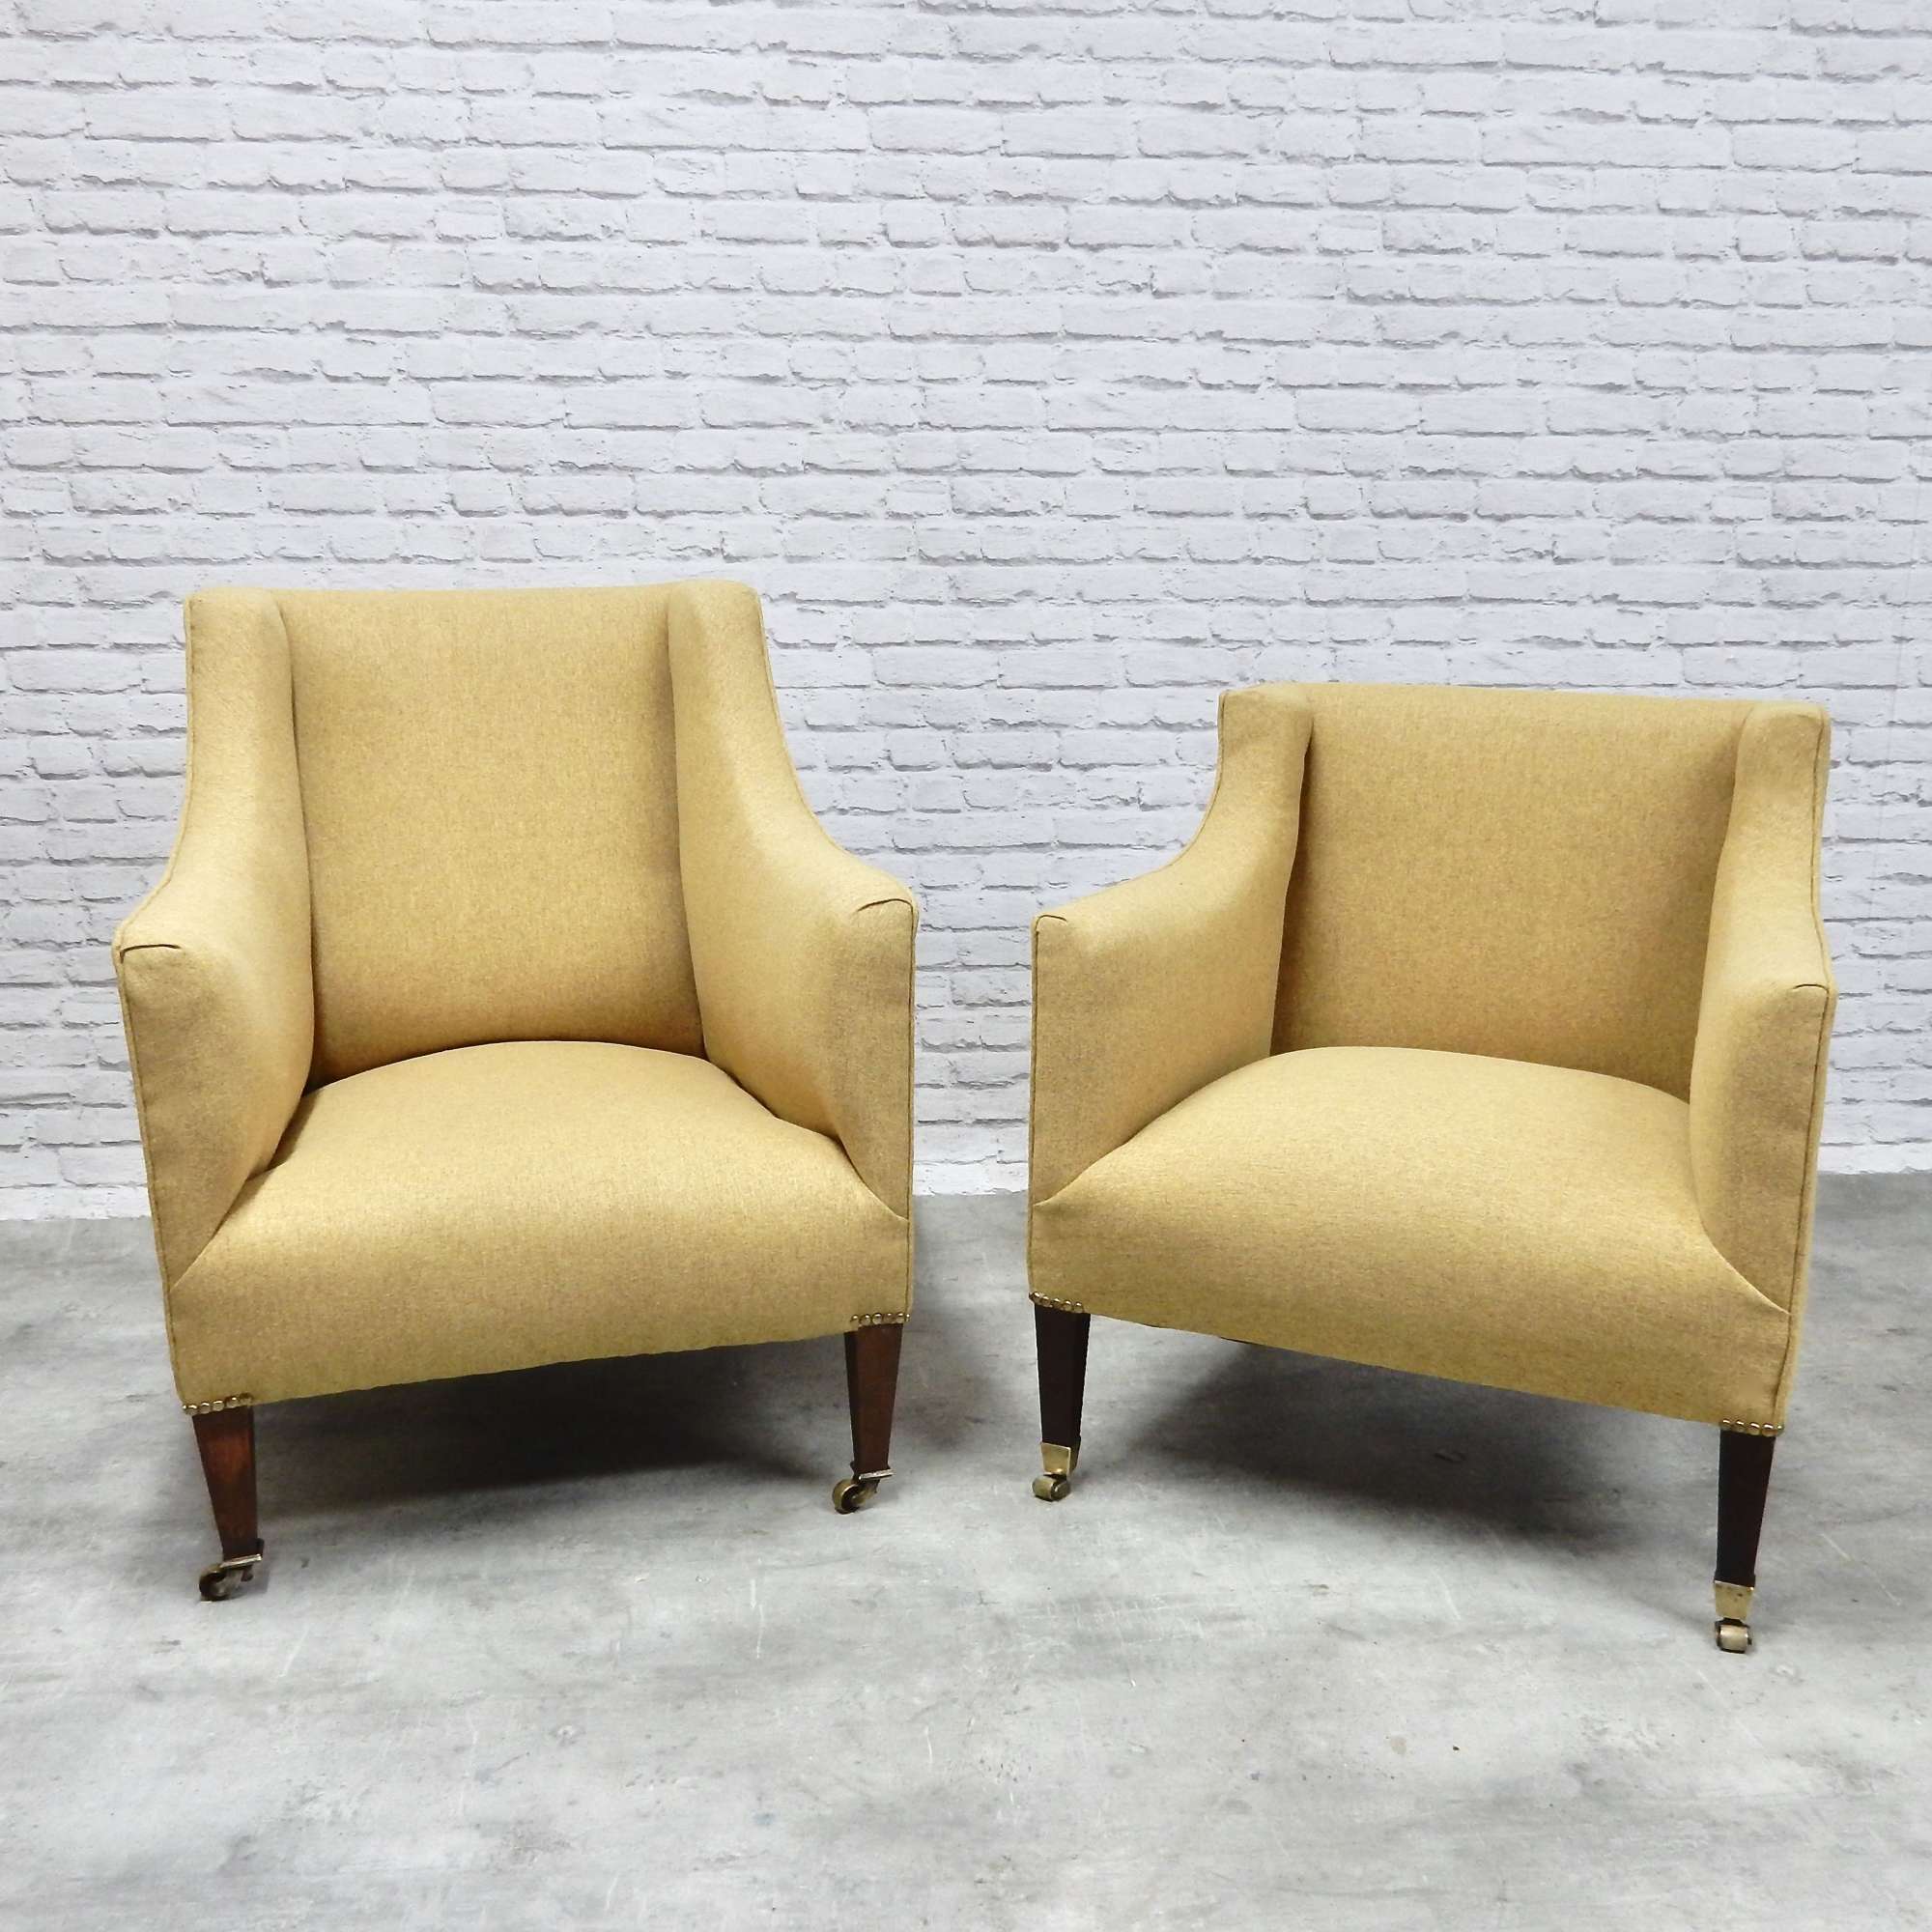 Two C19th Upholstered Armchairs